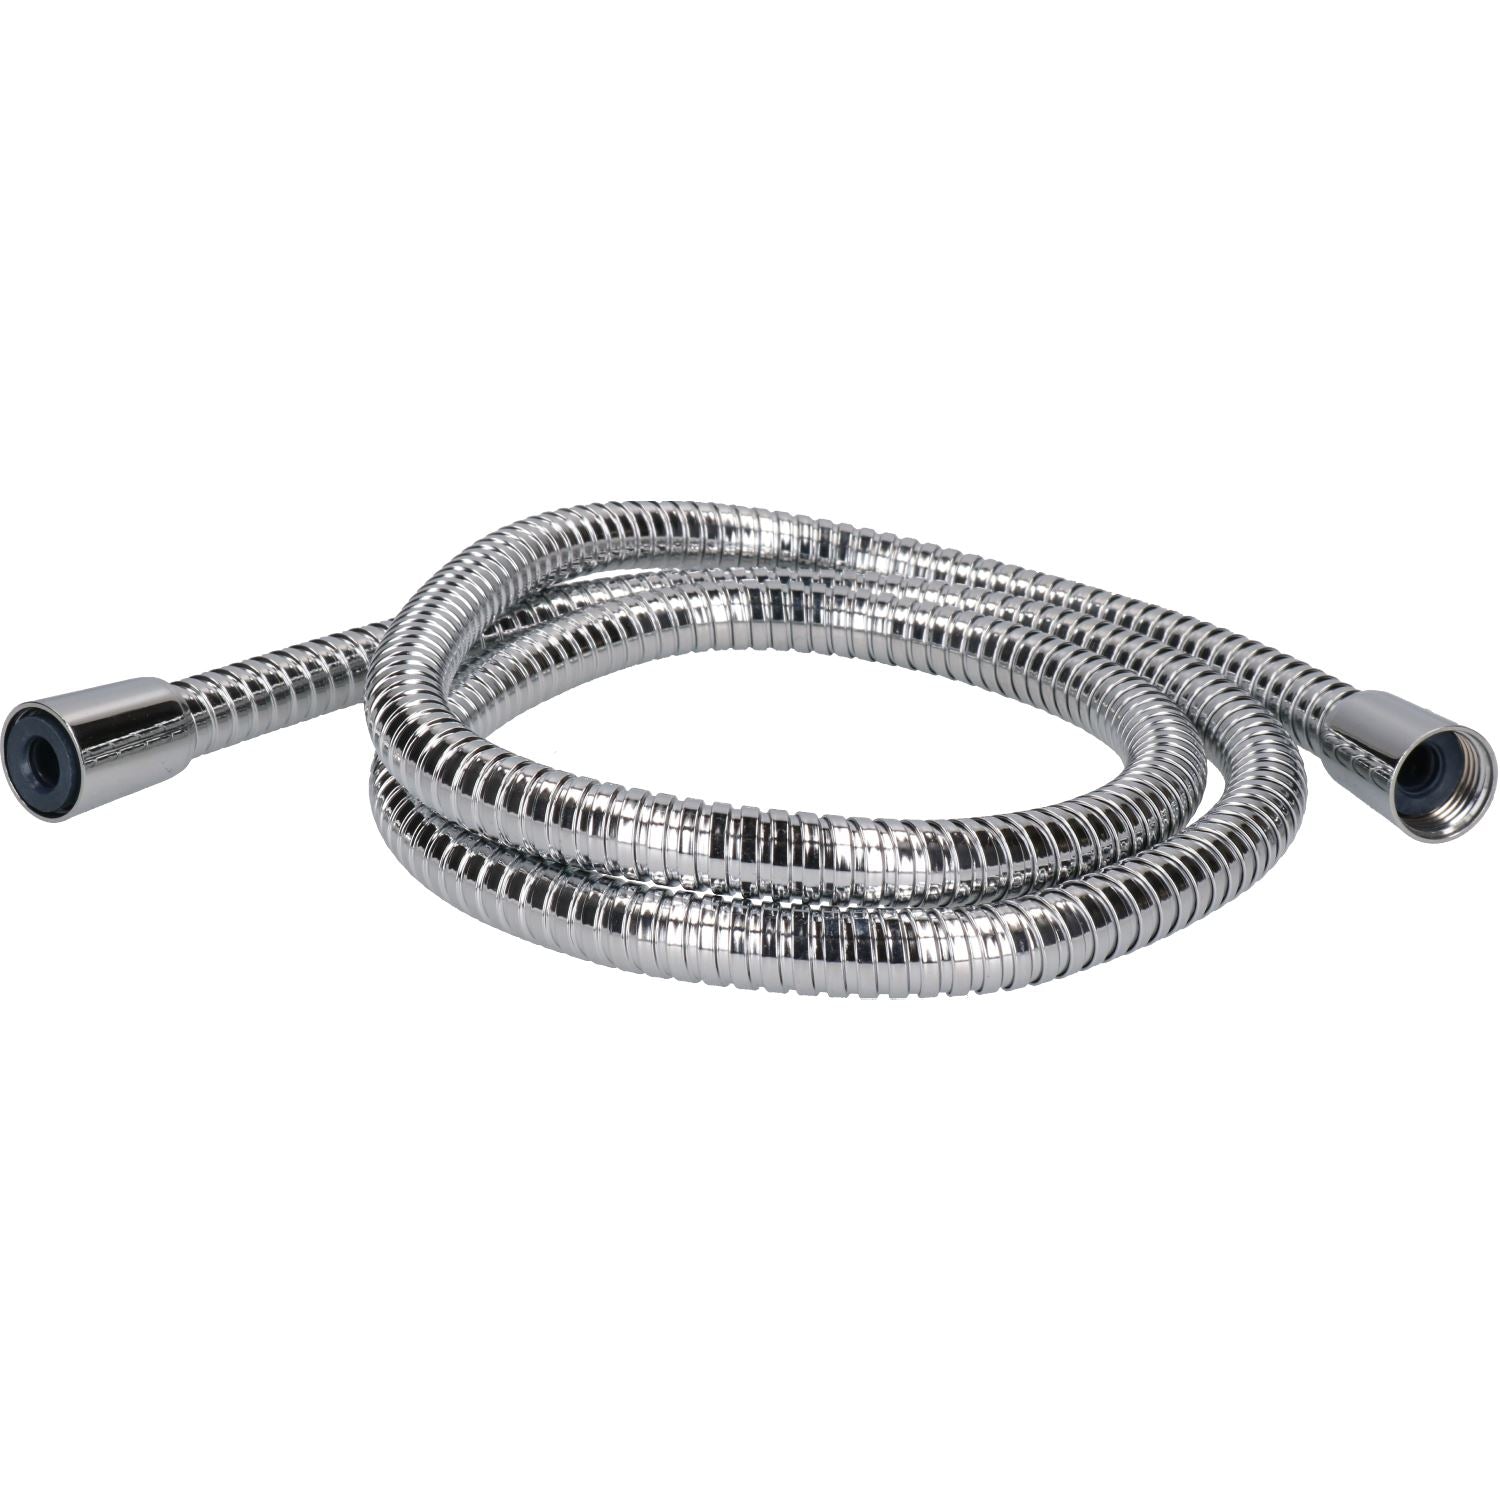 1.5m Chrome-Plated Brass Shower Hose Universal Fit Double Crimped Flexible Pipe